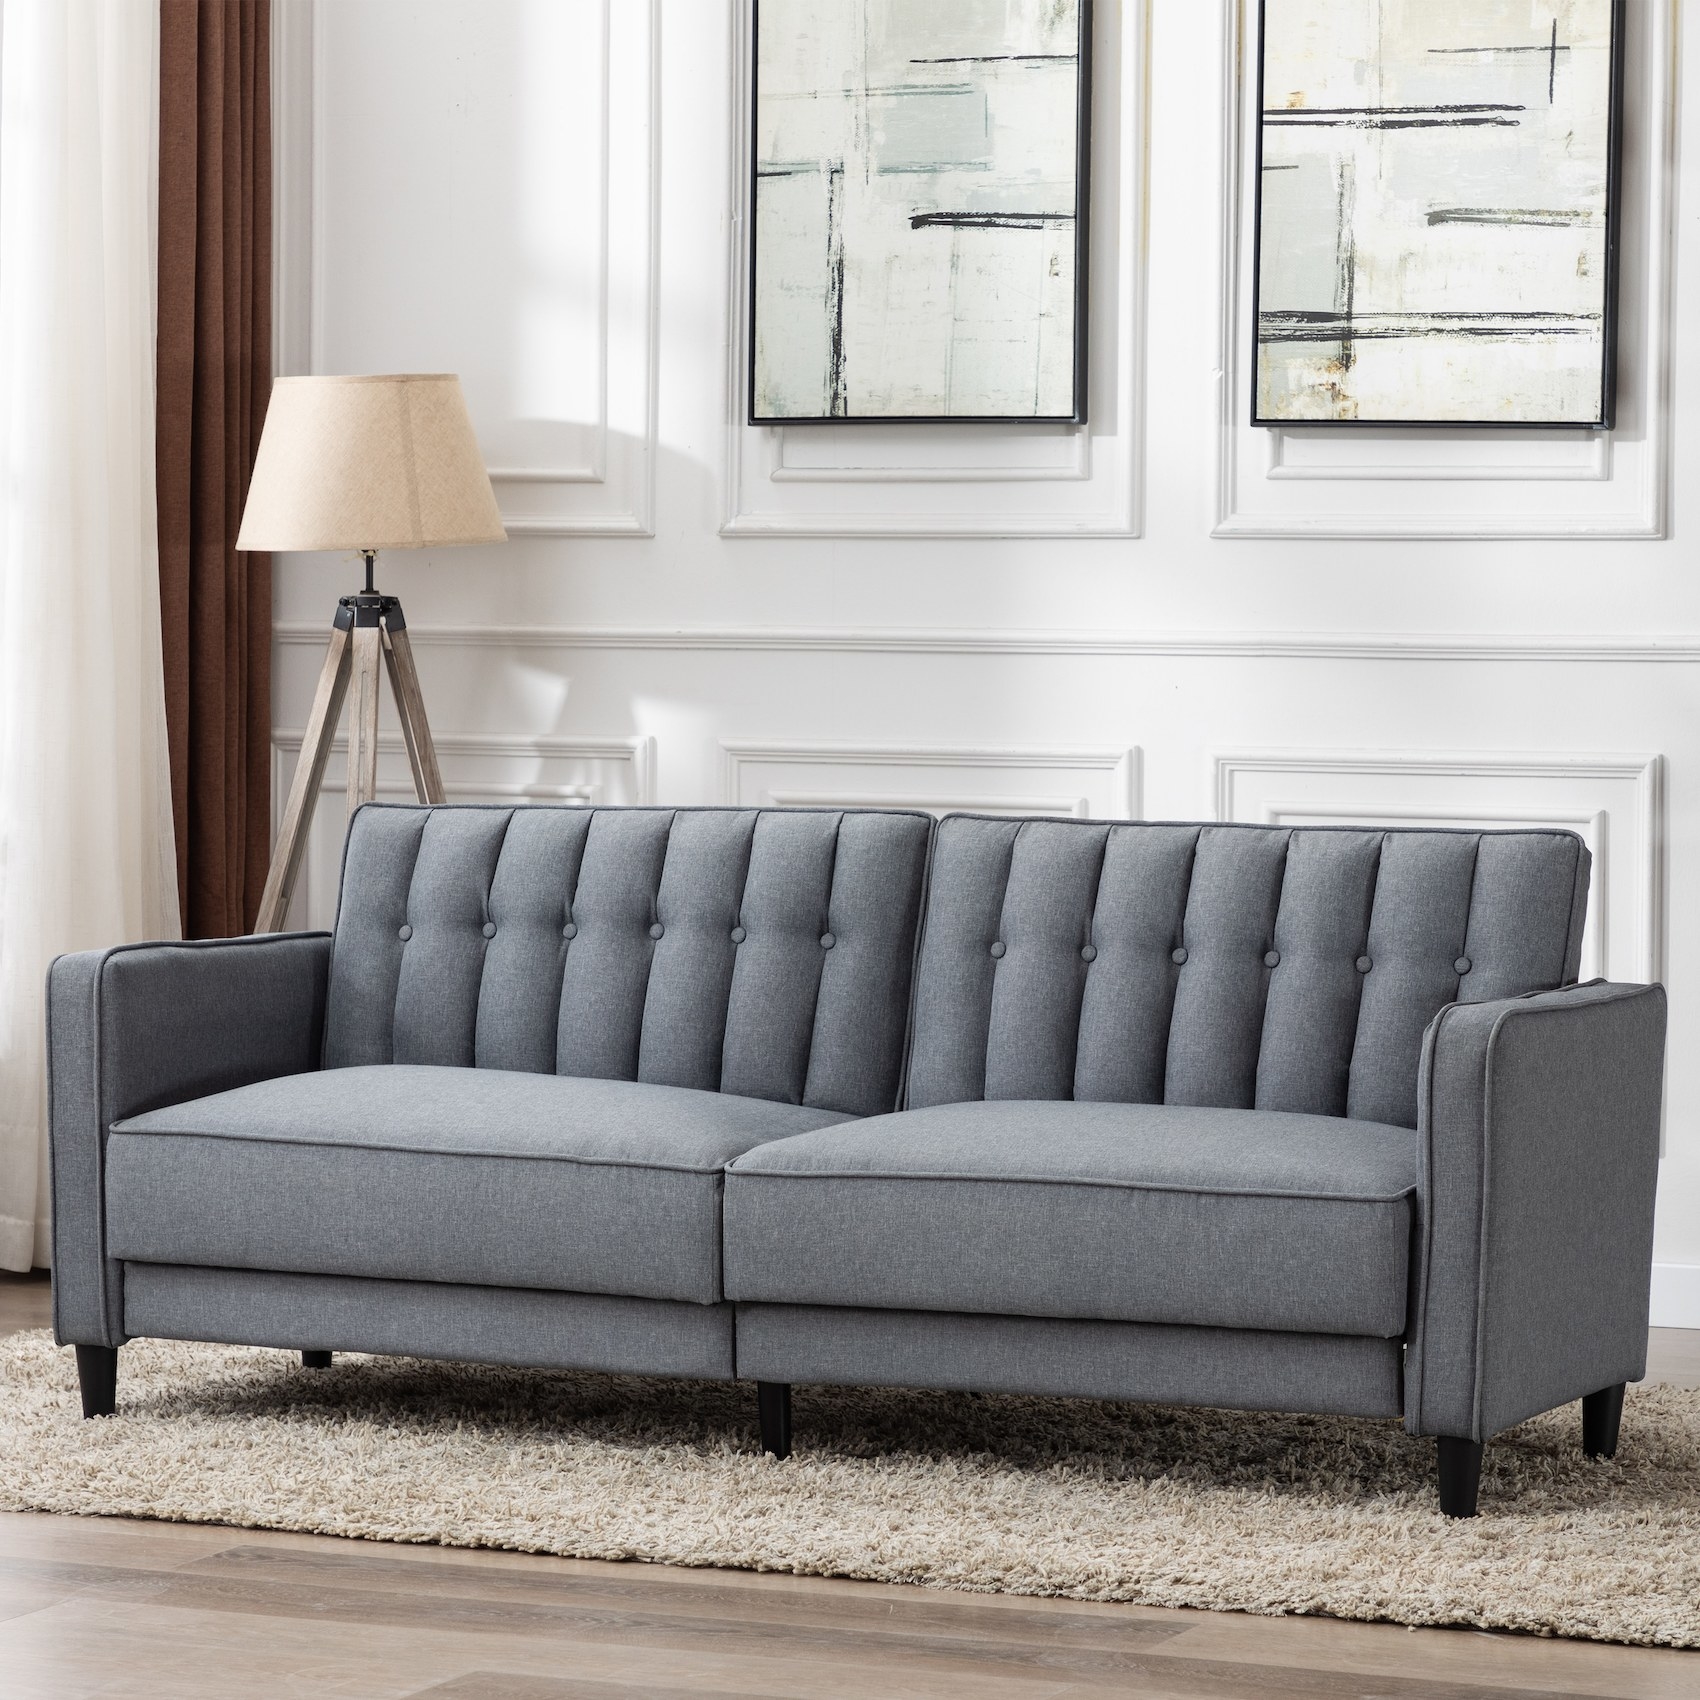 The plush blue couch with a back cushion that has button tufting and vertical lines